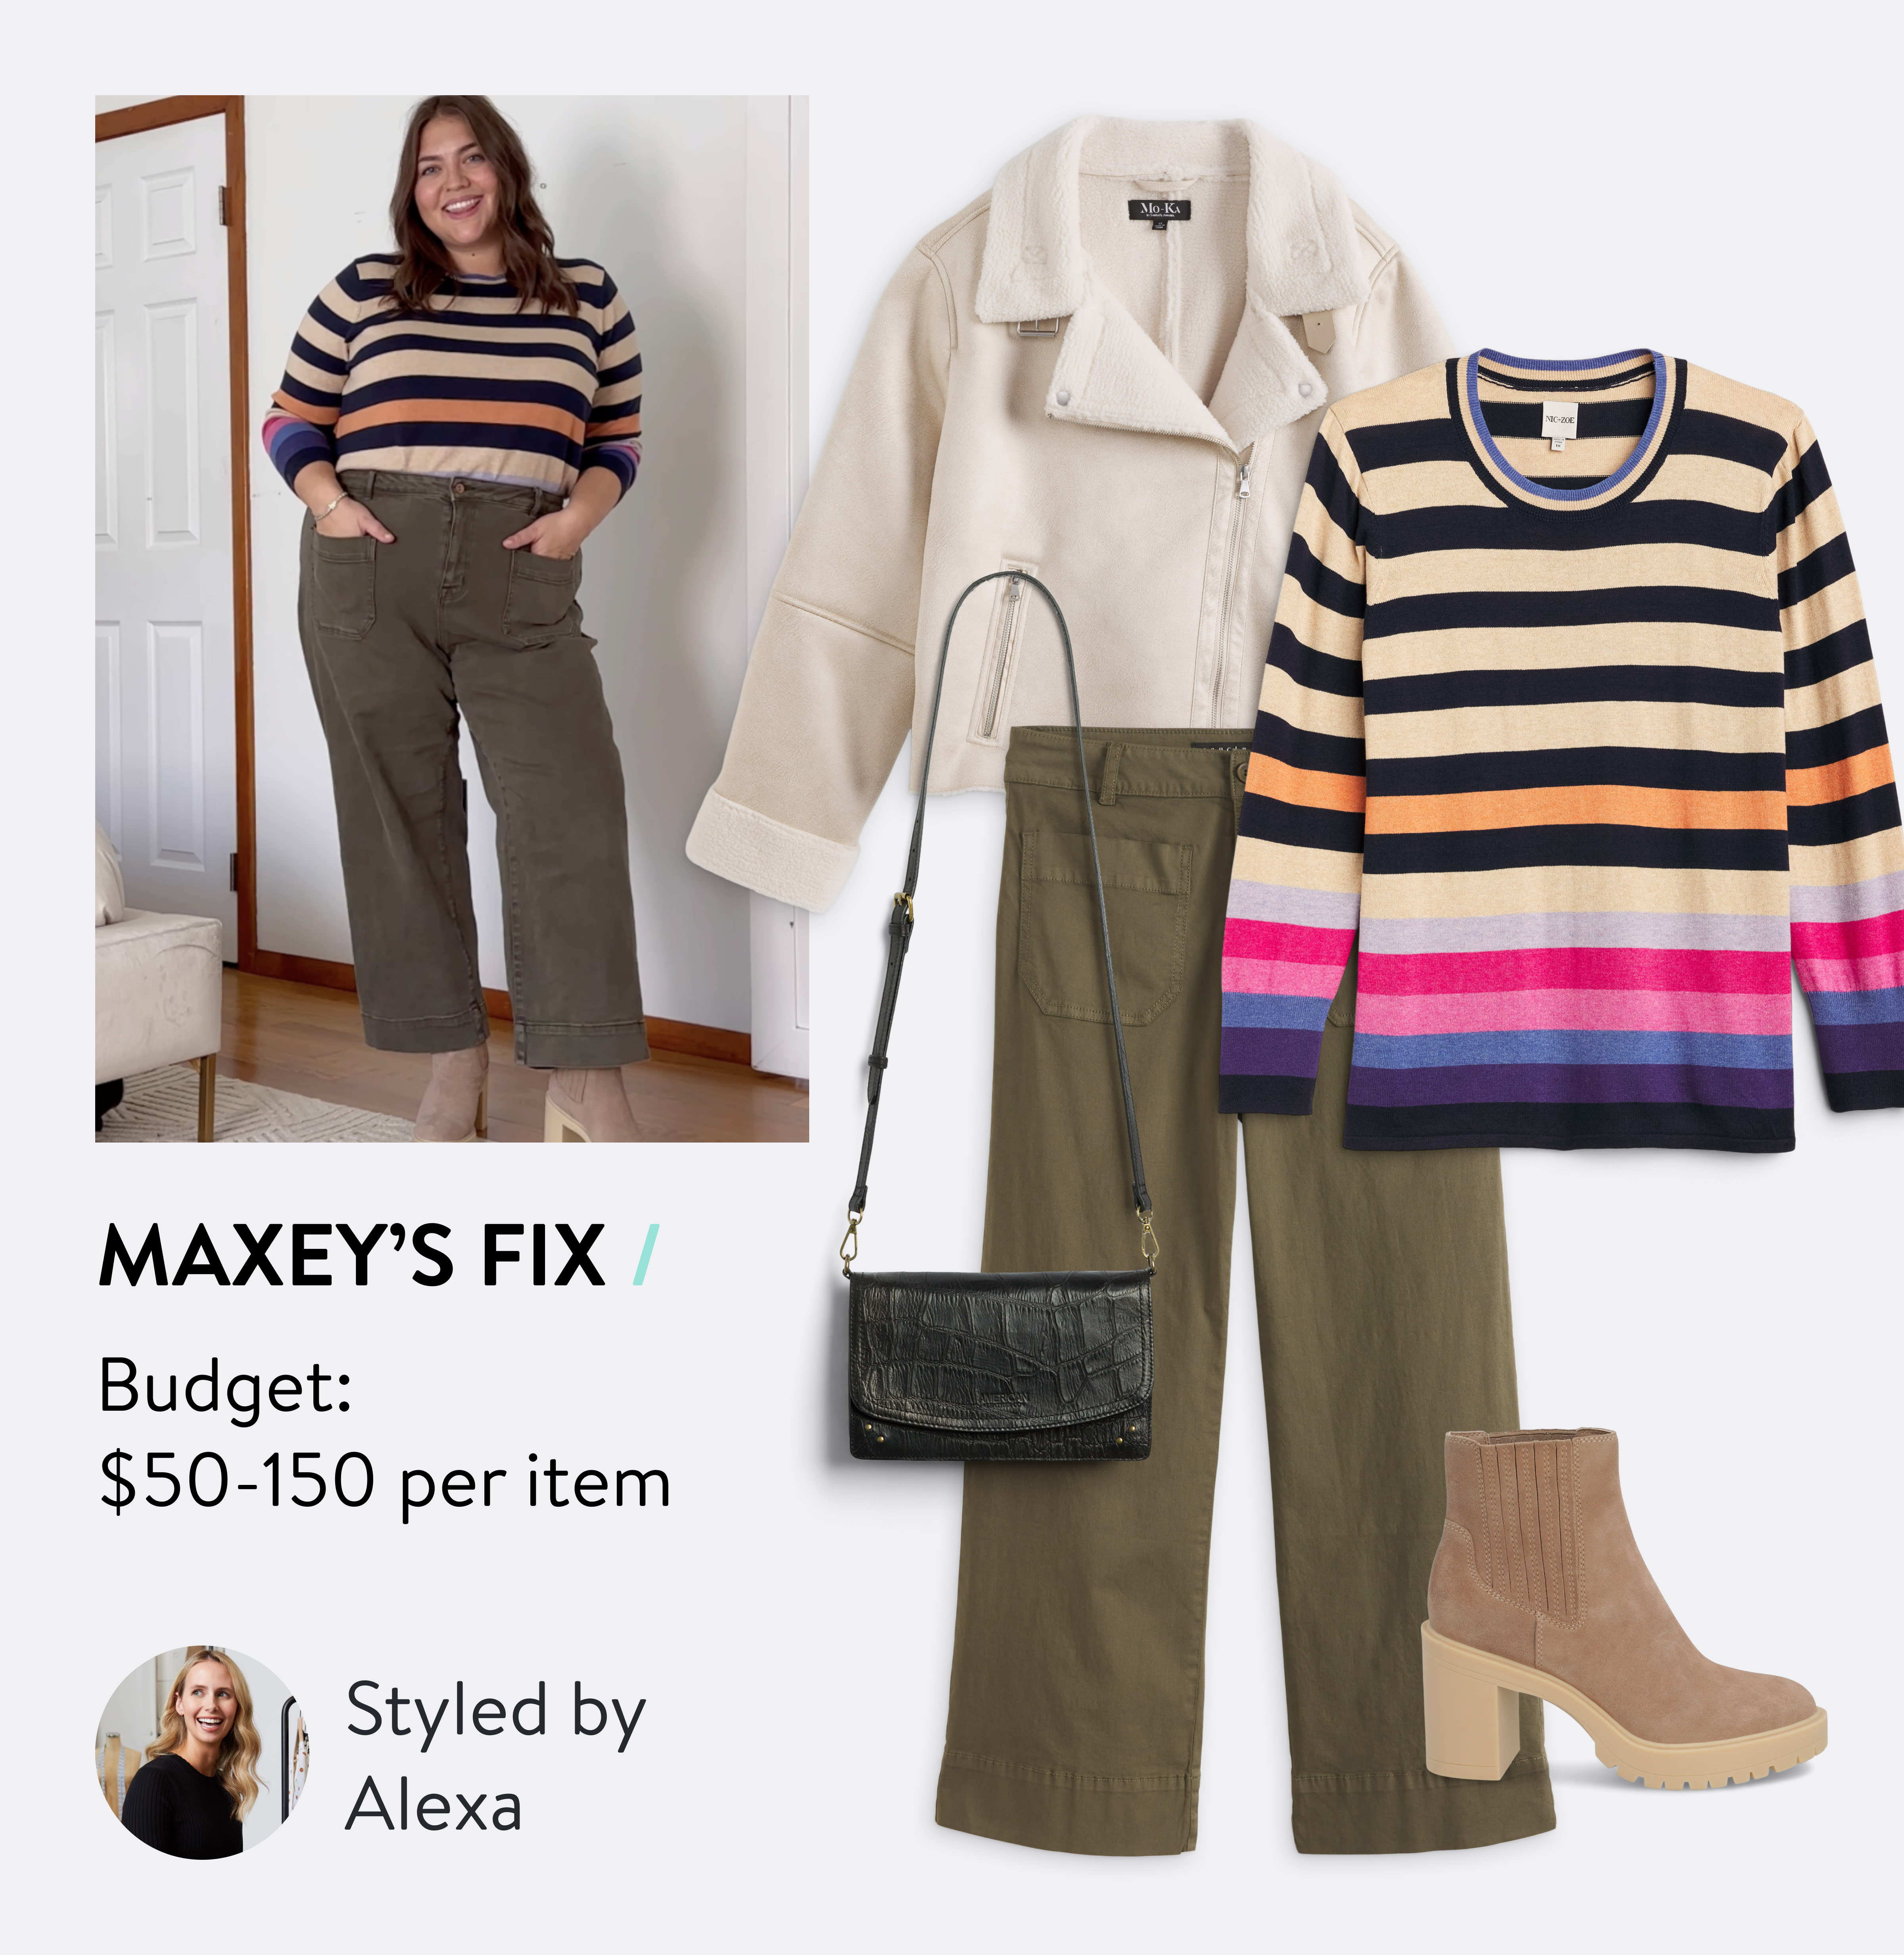 Maxey’s Fix. Budget: $50-150 per item. Styled by Alexa. Woman in striped sweater, cargo pants and boots, selection of Stitch Fix outfit with beige moto jacket, colorful striped sweater, green wide-leg cargo pants, black cross body bag, and tan boots, Stitch Fix Stylist wearing black top